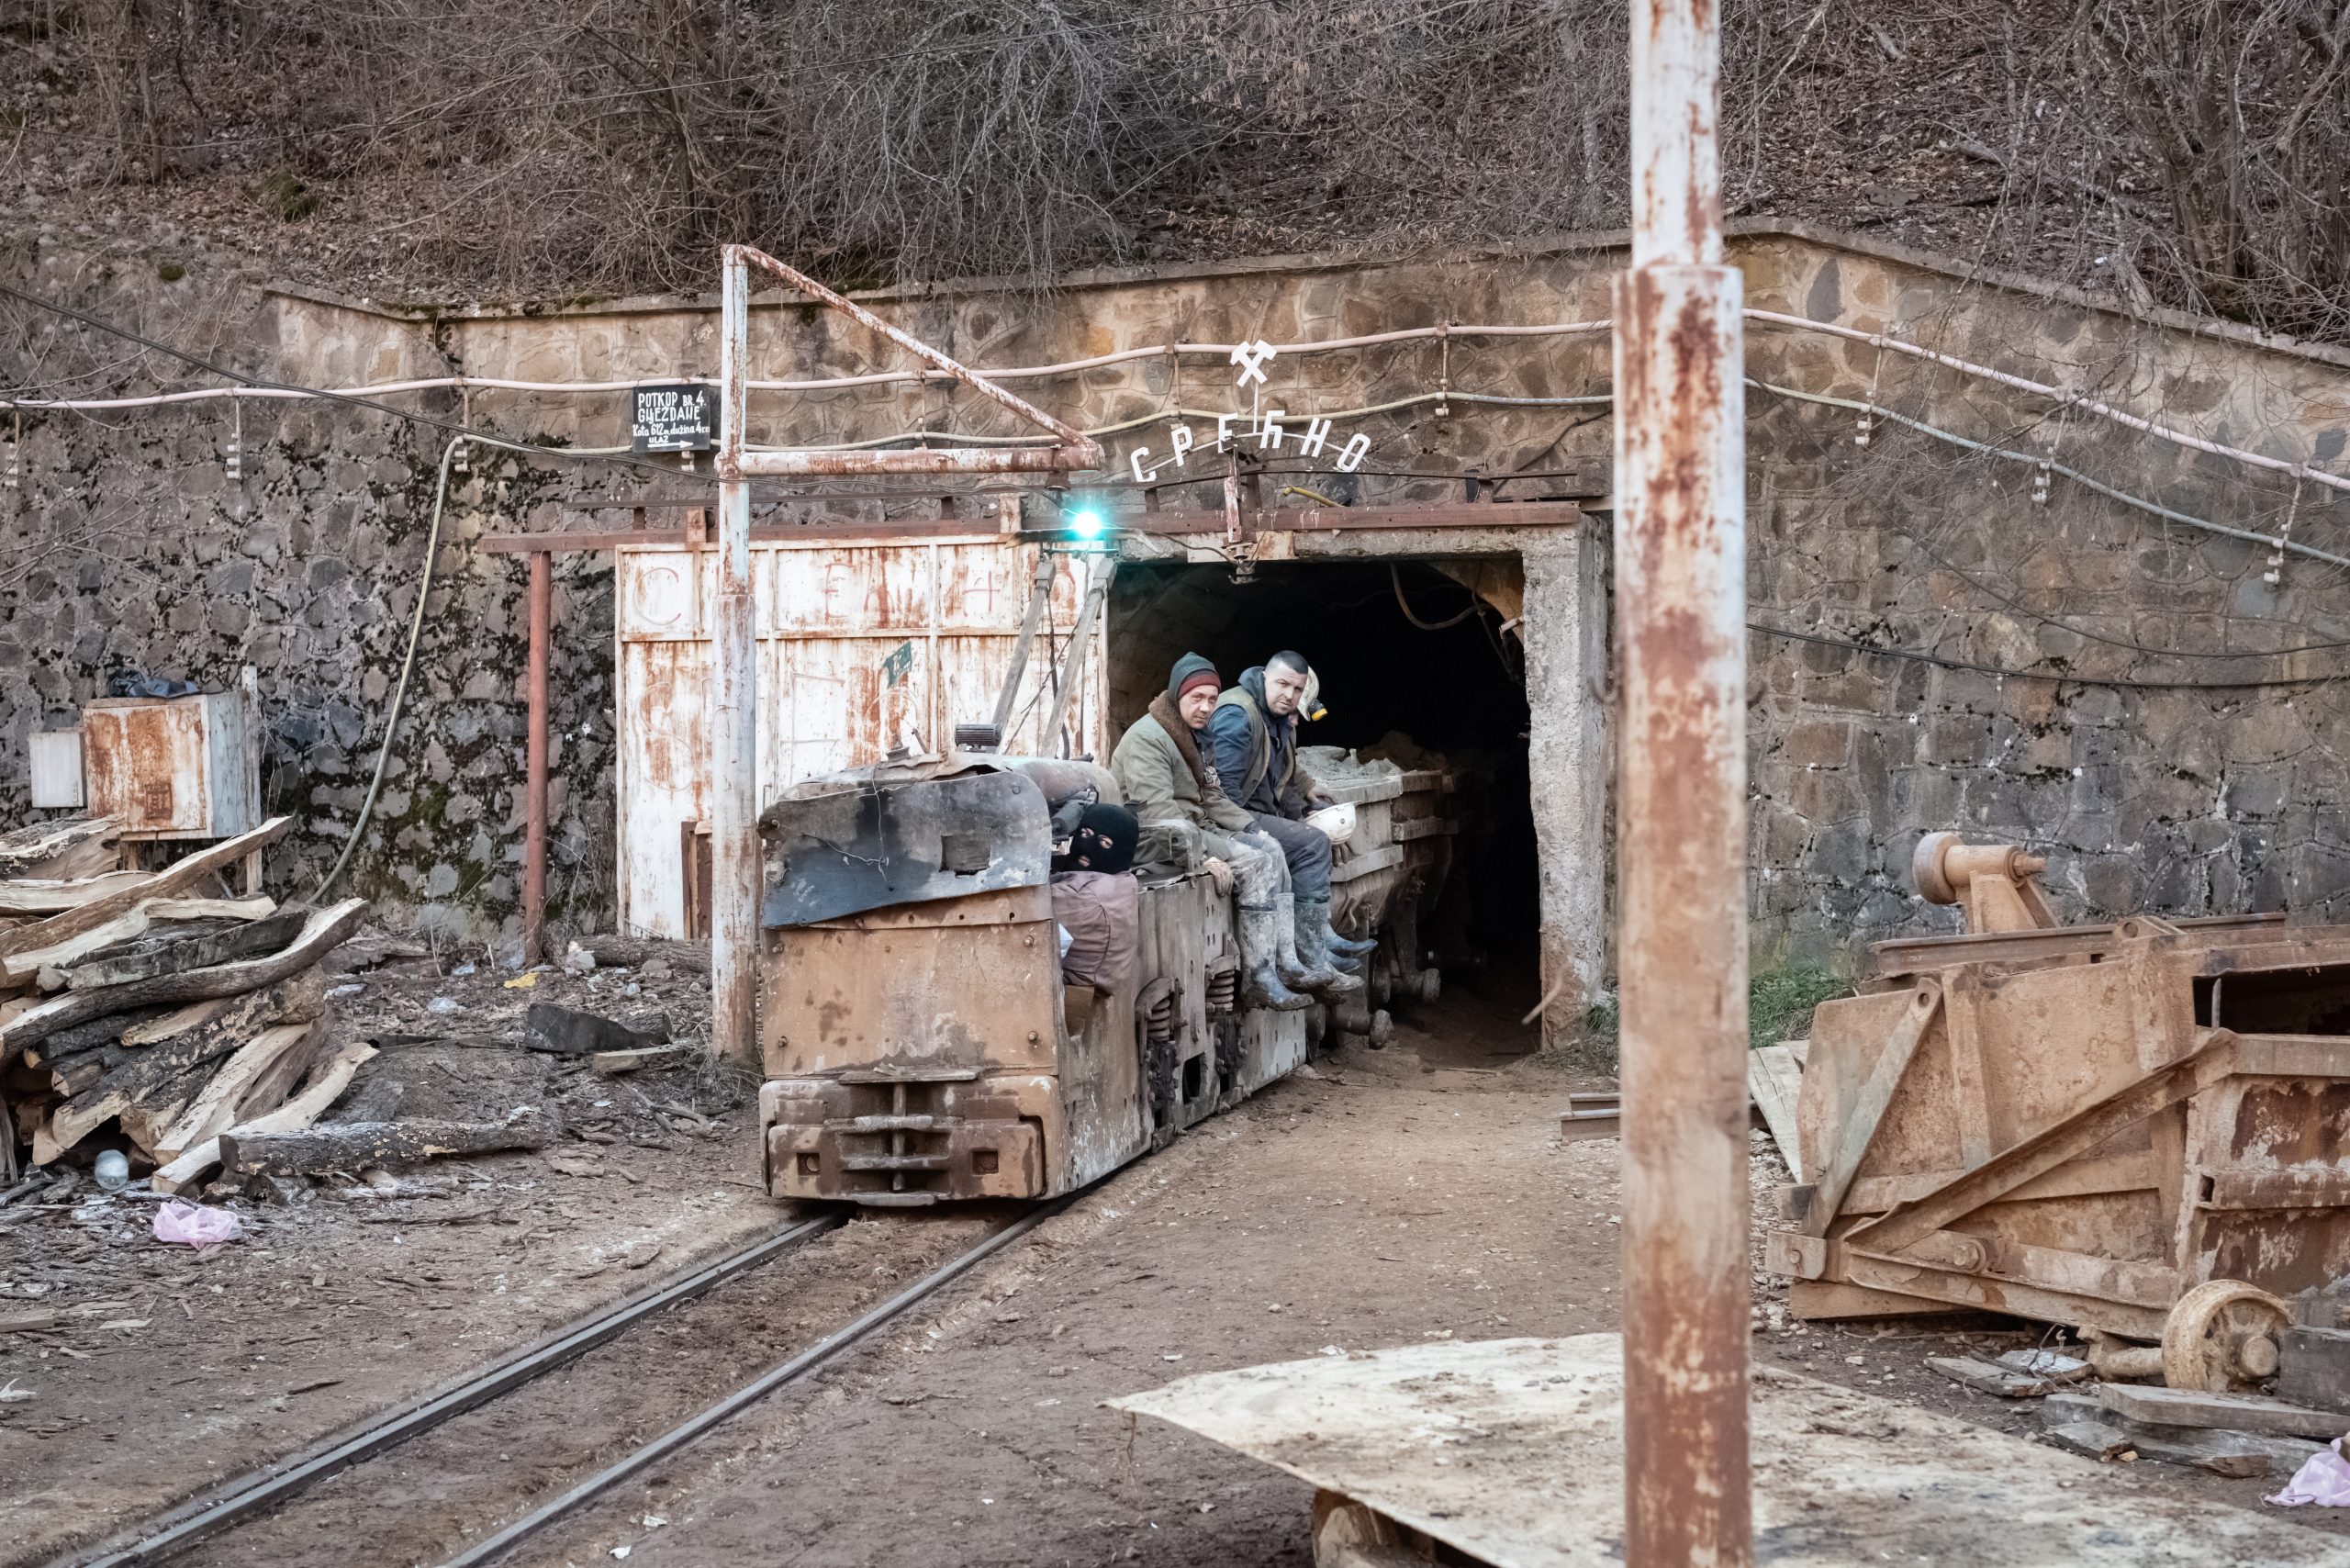 Miners on a convoy of wagons exit the mine entrance after the morning shift at the Trepça mine site in Crnac.